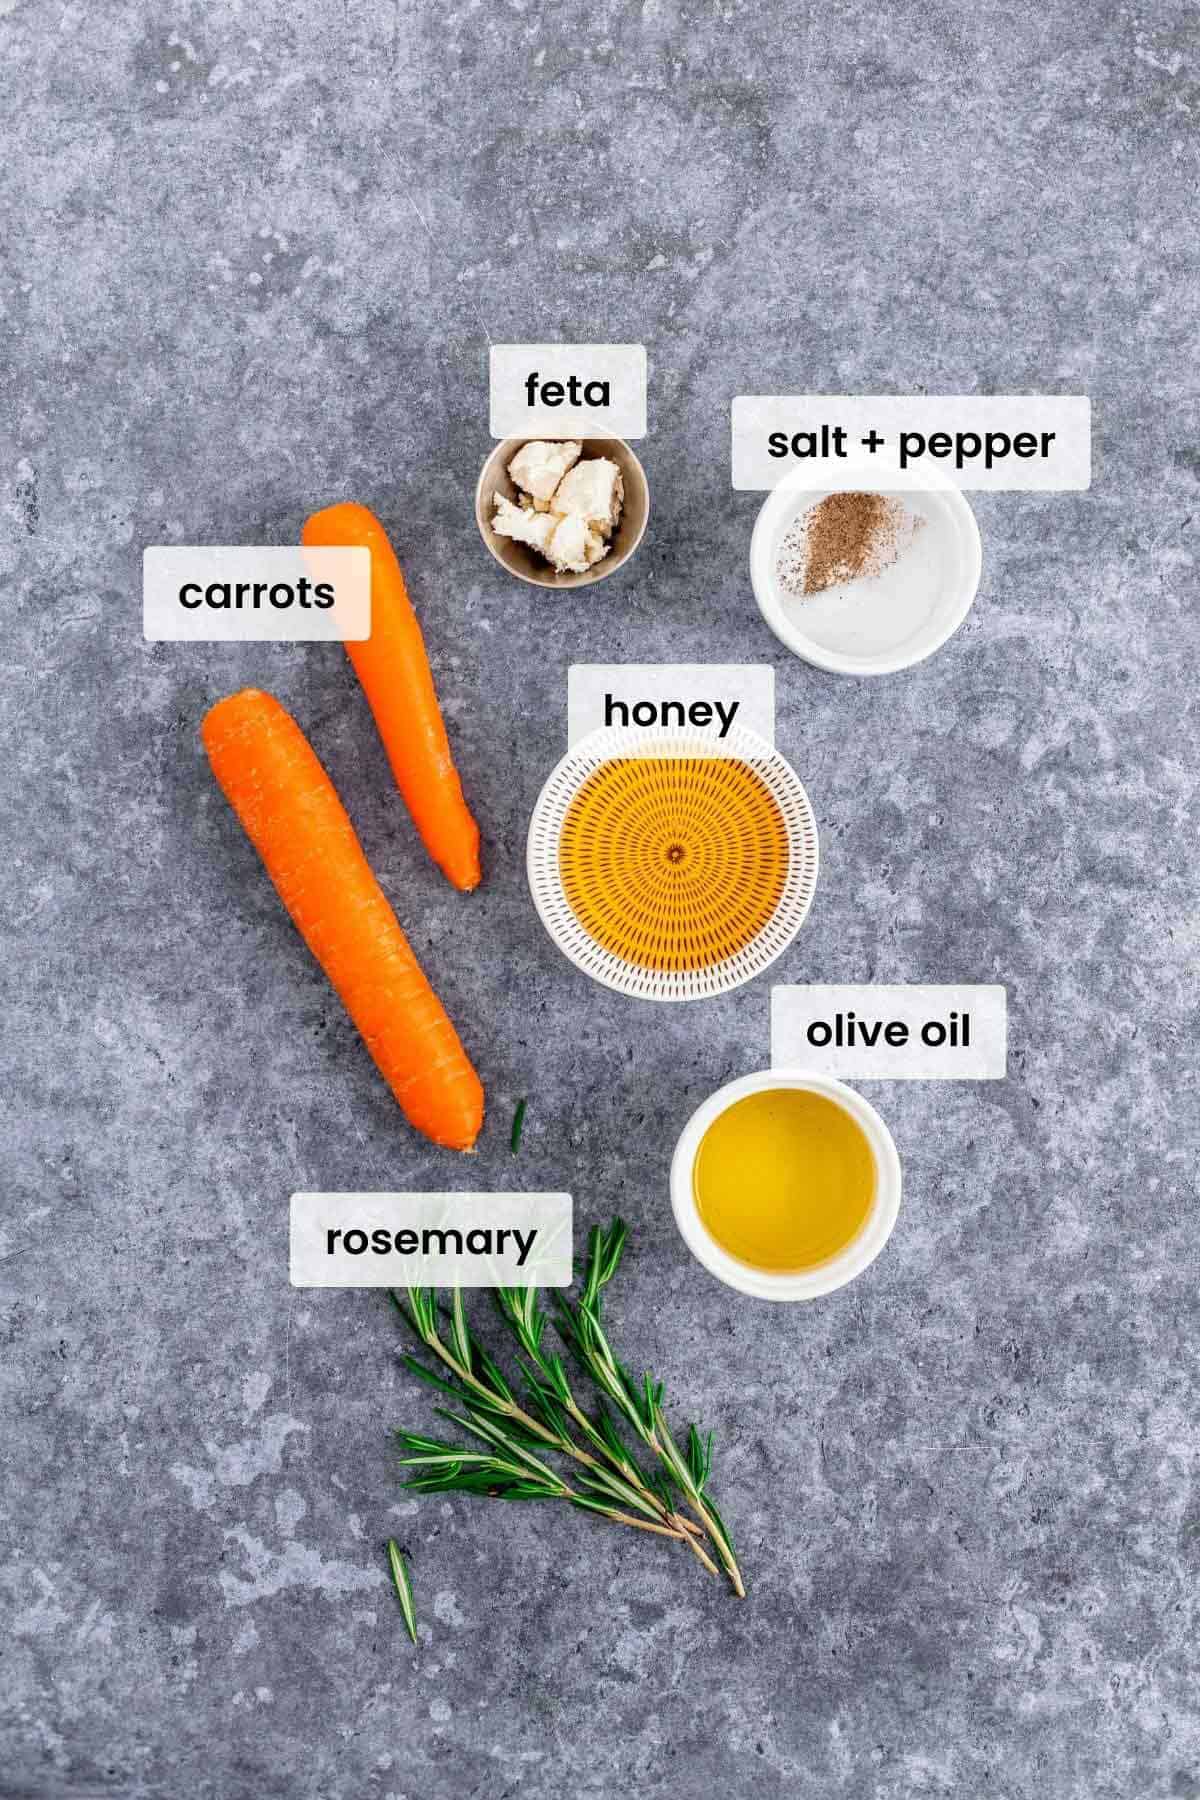 Honey Glazed Carrots In Air Fryer With Feta and Rosemary Ingredients